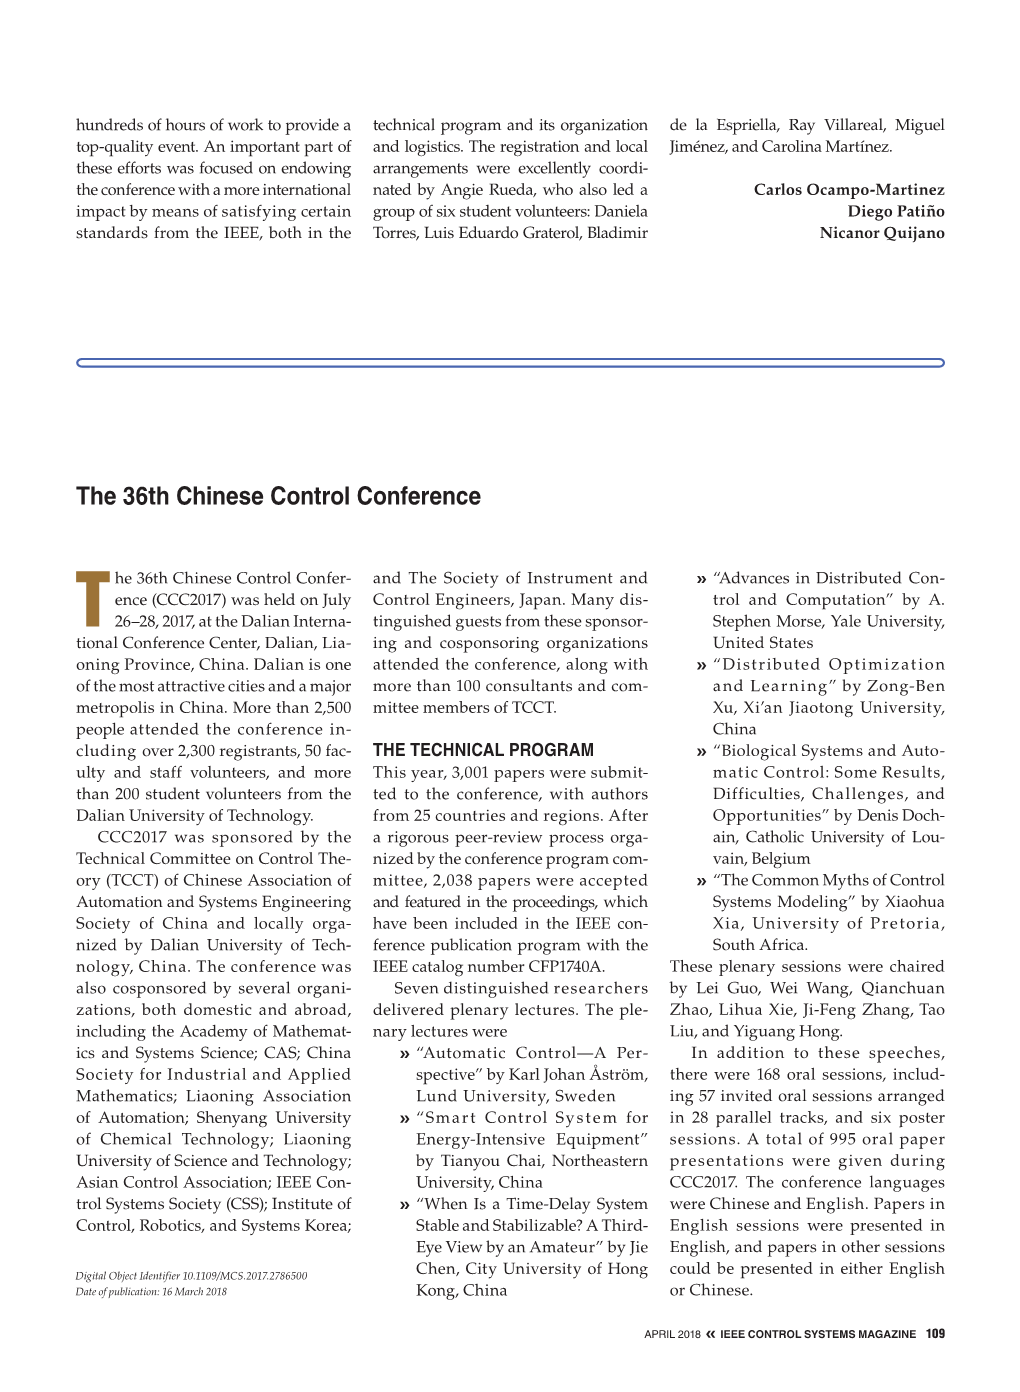 The 36Th Chinese Control Conference